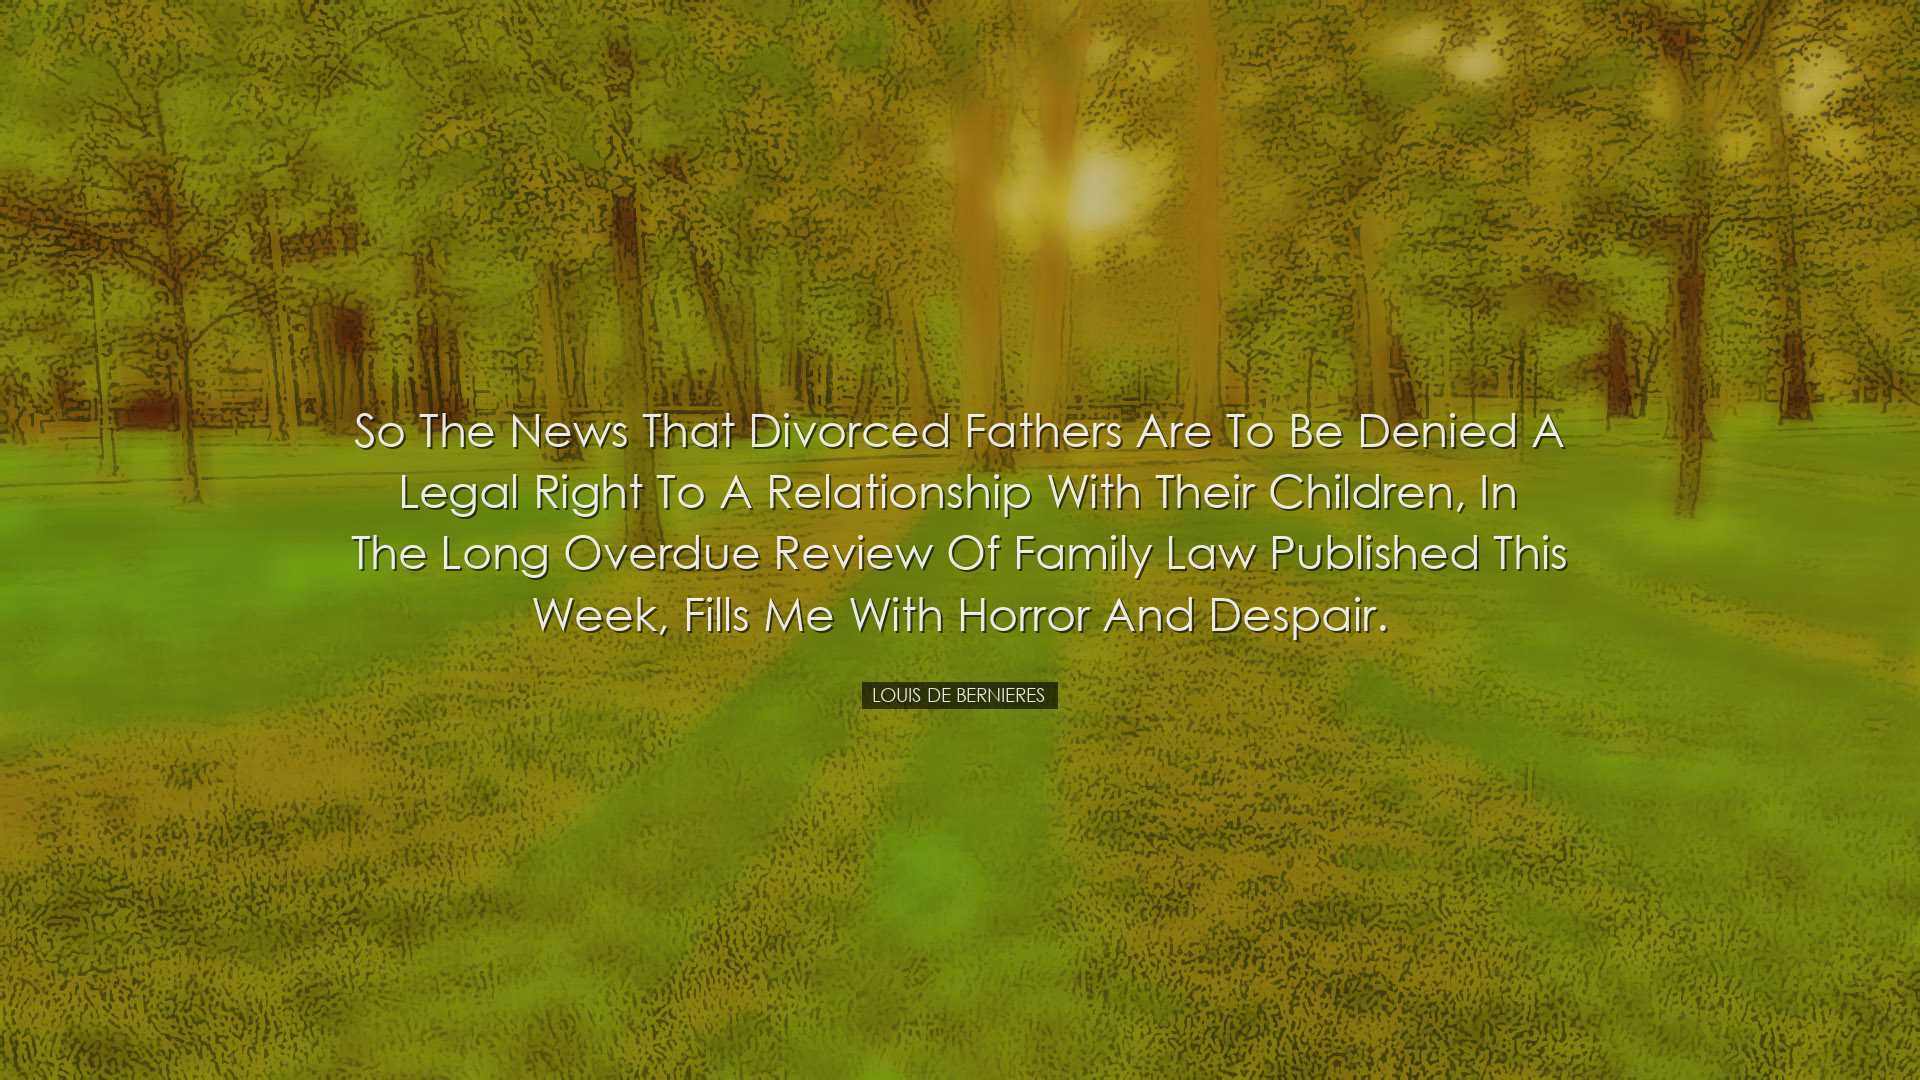 So the news that divorced fathers are to be denied a legal right t